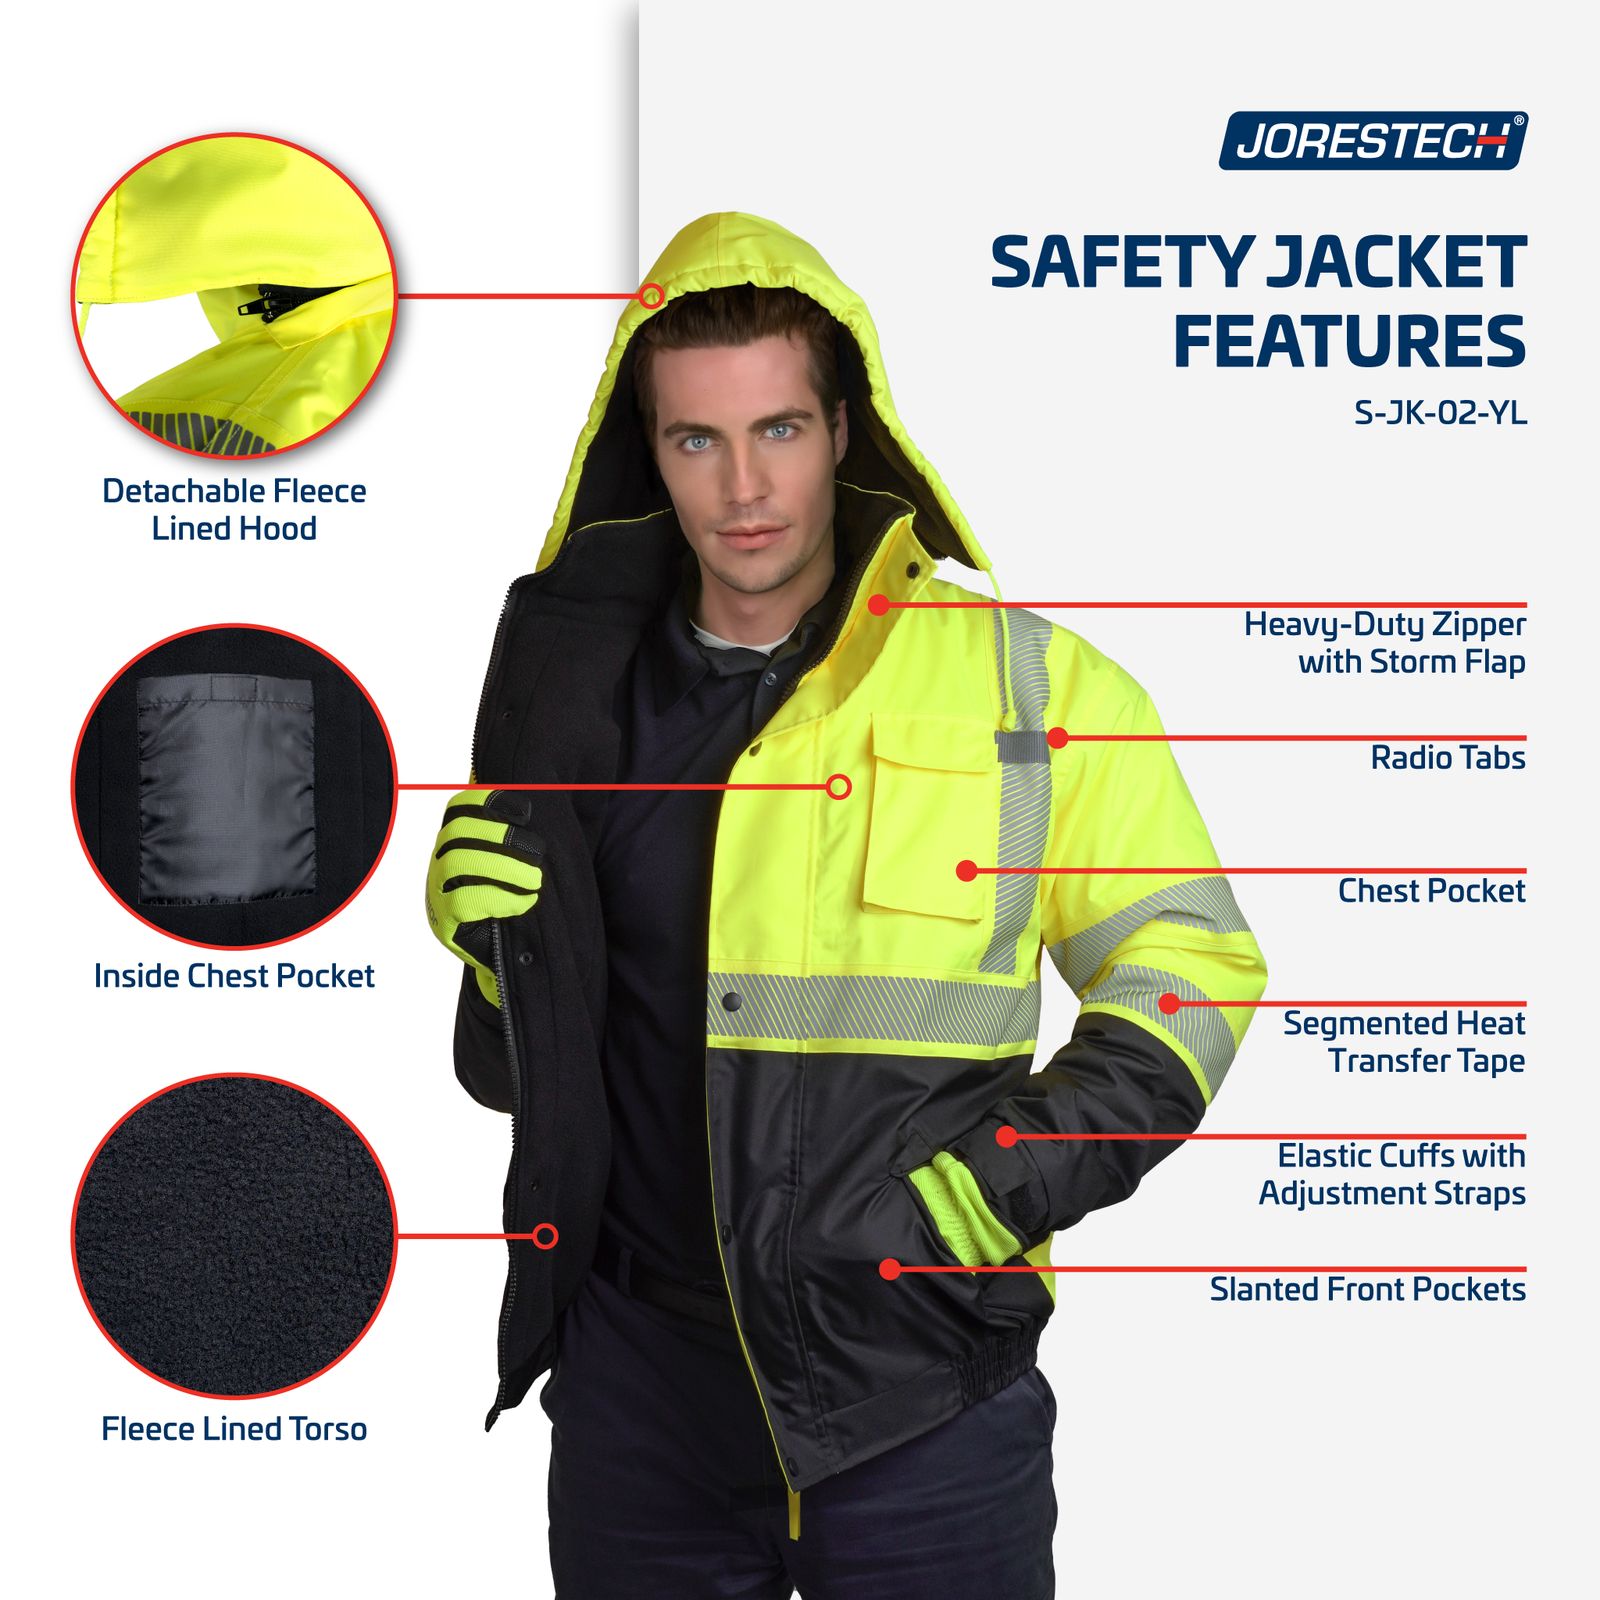 Man wearing the yellow safety jacket with reflective stripes and call outs listing outstanding features like heavy duty zipper, radio tabs, segmented heat transfer, multiple pockets and more.